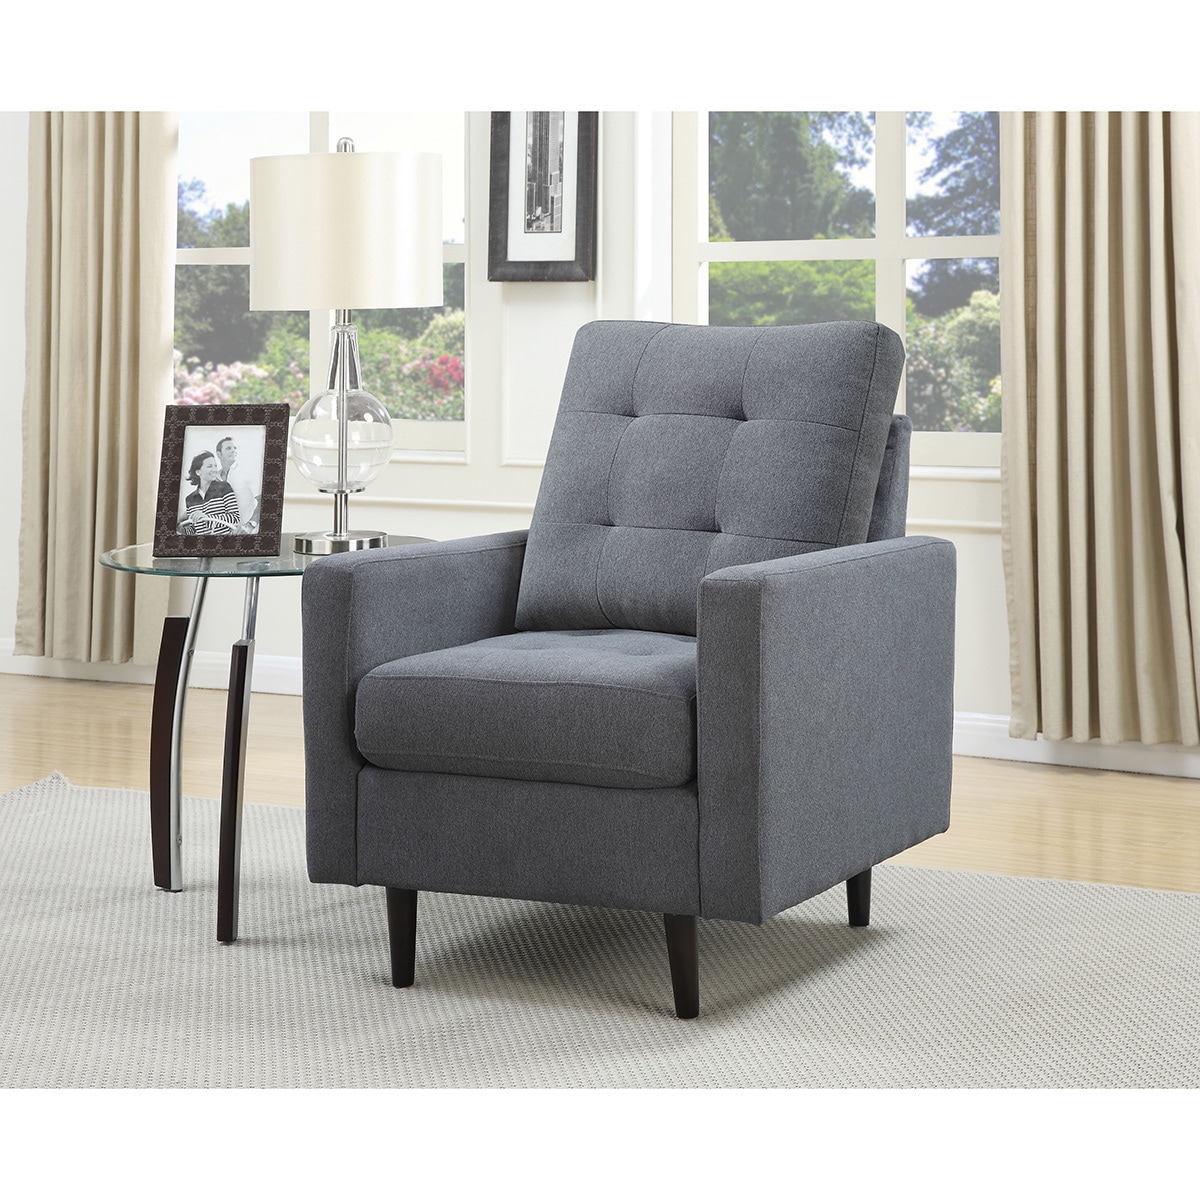 Stacey Granite Accent Chair